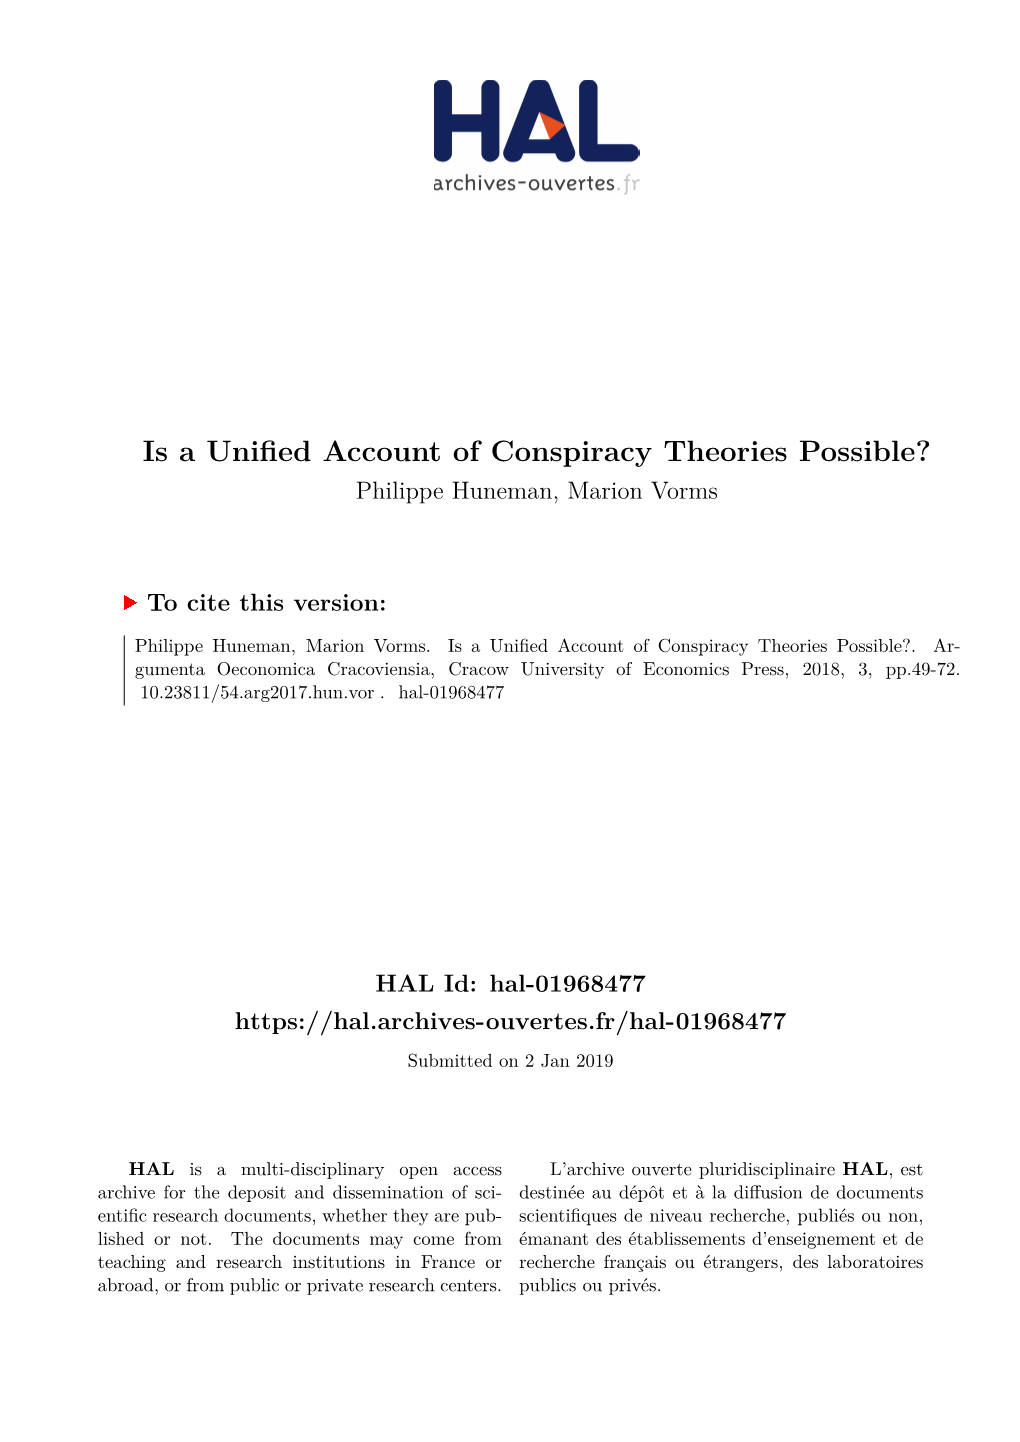 Is a Unified Account of Conspiracy Theories Possible? Philippe Huneman, Marion Vorms